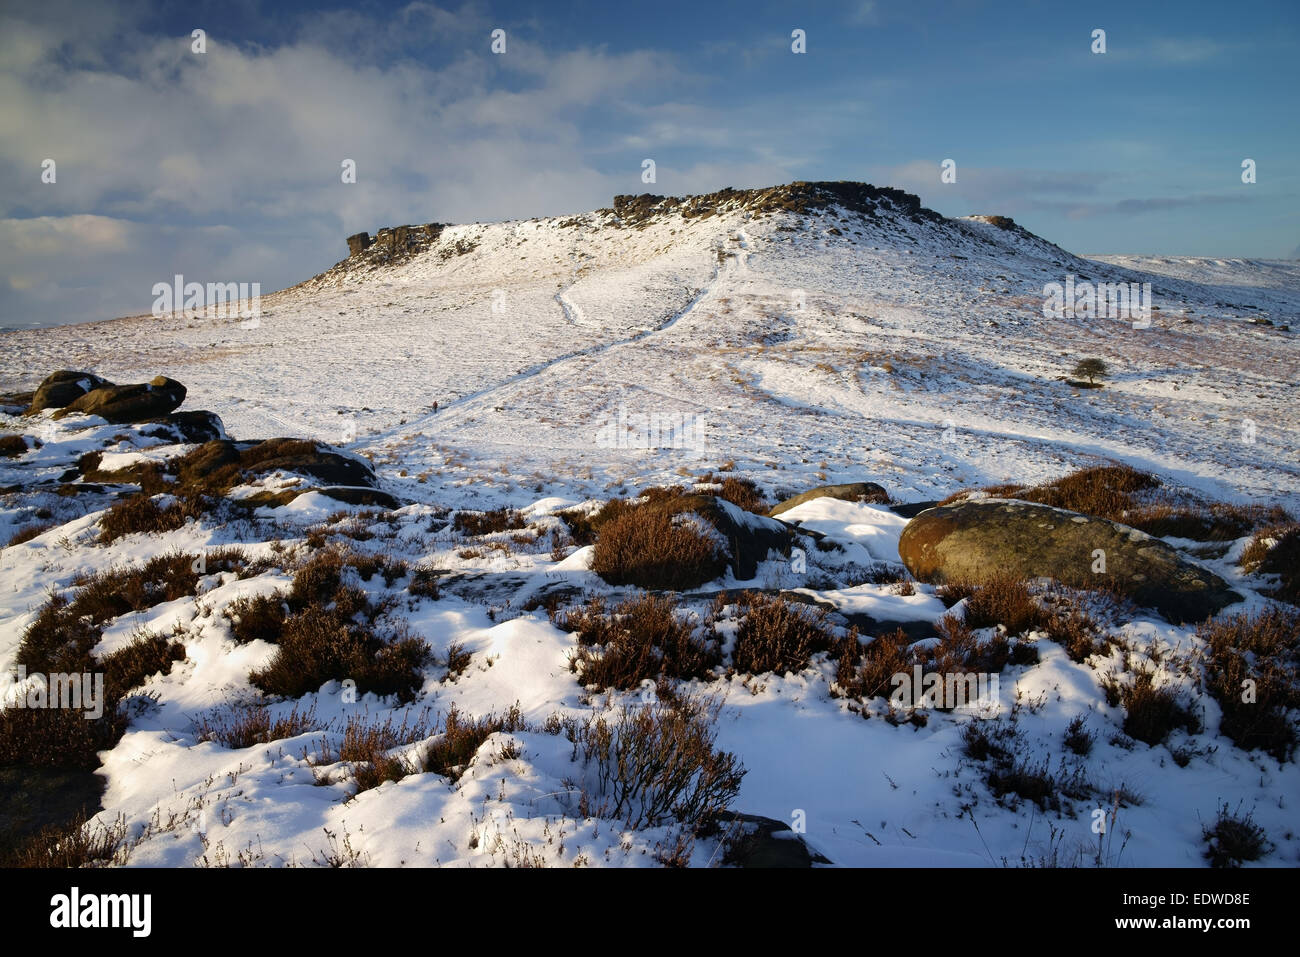 UK,South Yorkshire,Peak District,Upper Burbage Valley,Higger Tor and Carl Wark after Snowfall Stock Photo